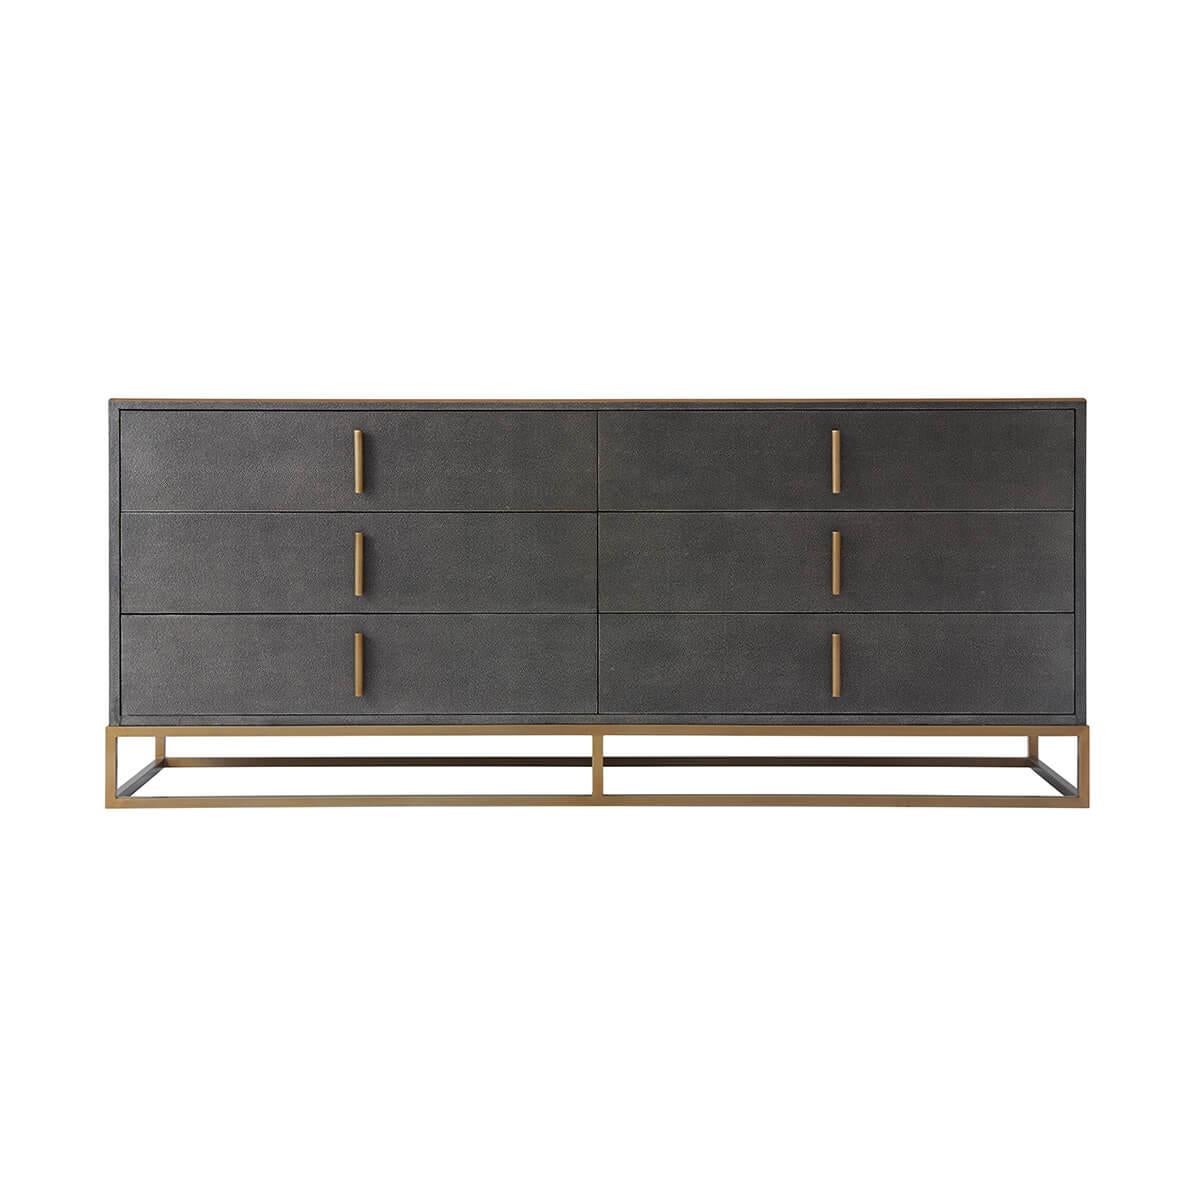 Wrapped in a shagreen embossed leather in our dark tempest smoke finish, with six long drawers and with brushed brass finish hardware and trim, all raised on a cube form brushed brass base.

Dimensions: 72